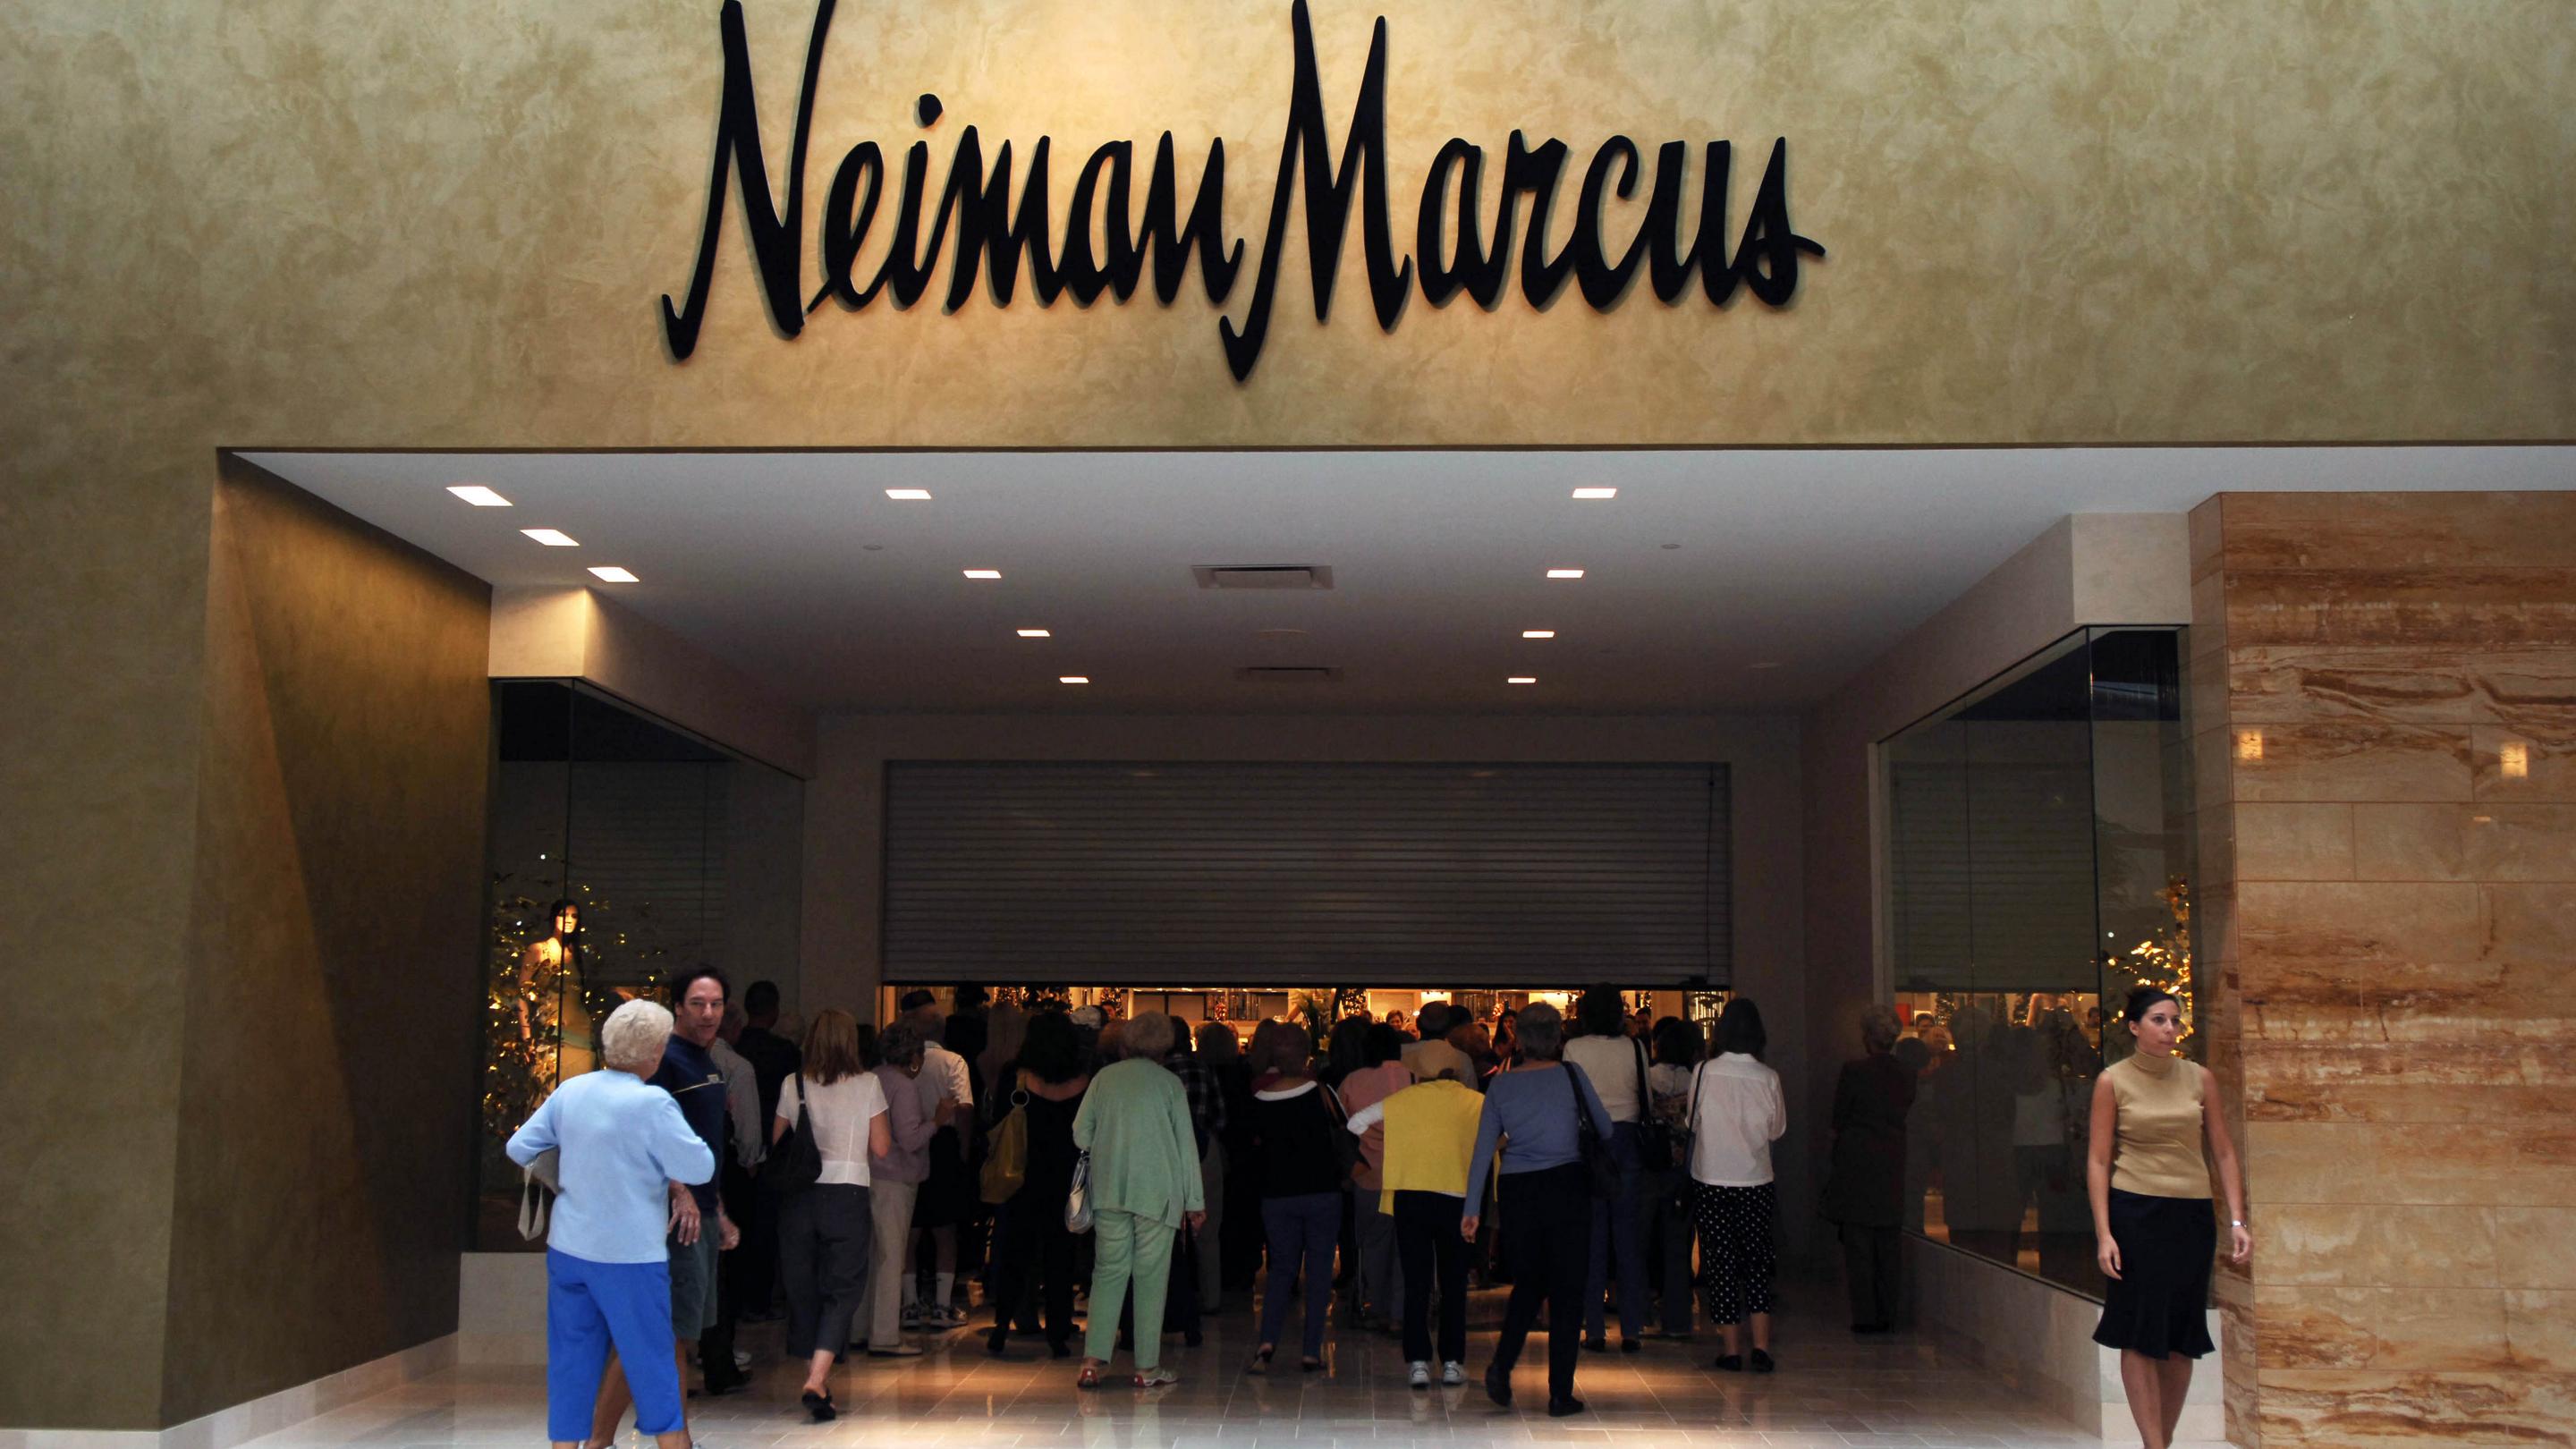 The Galleria - Neiman Marcus is now open by appointment only  Monday-Saturday, 11am-7pm and Sunday, 12-6pm. Visit stores.neimanmarcus.com/booking  to schedule an appointment today.